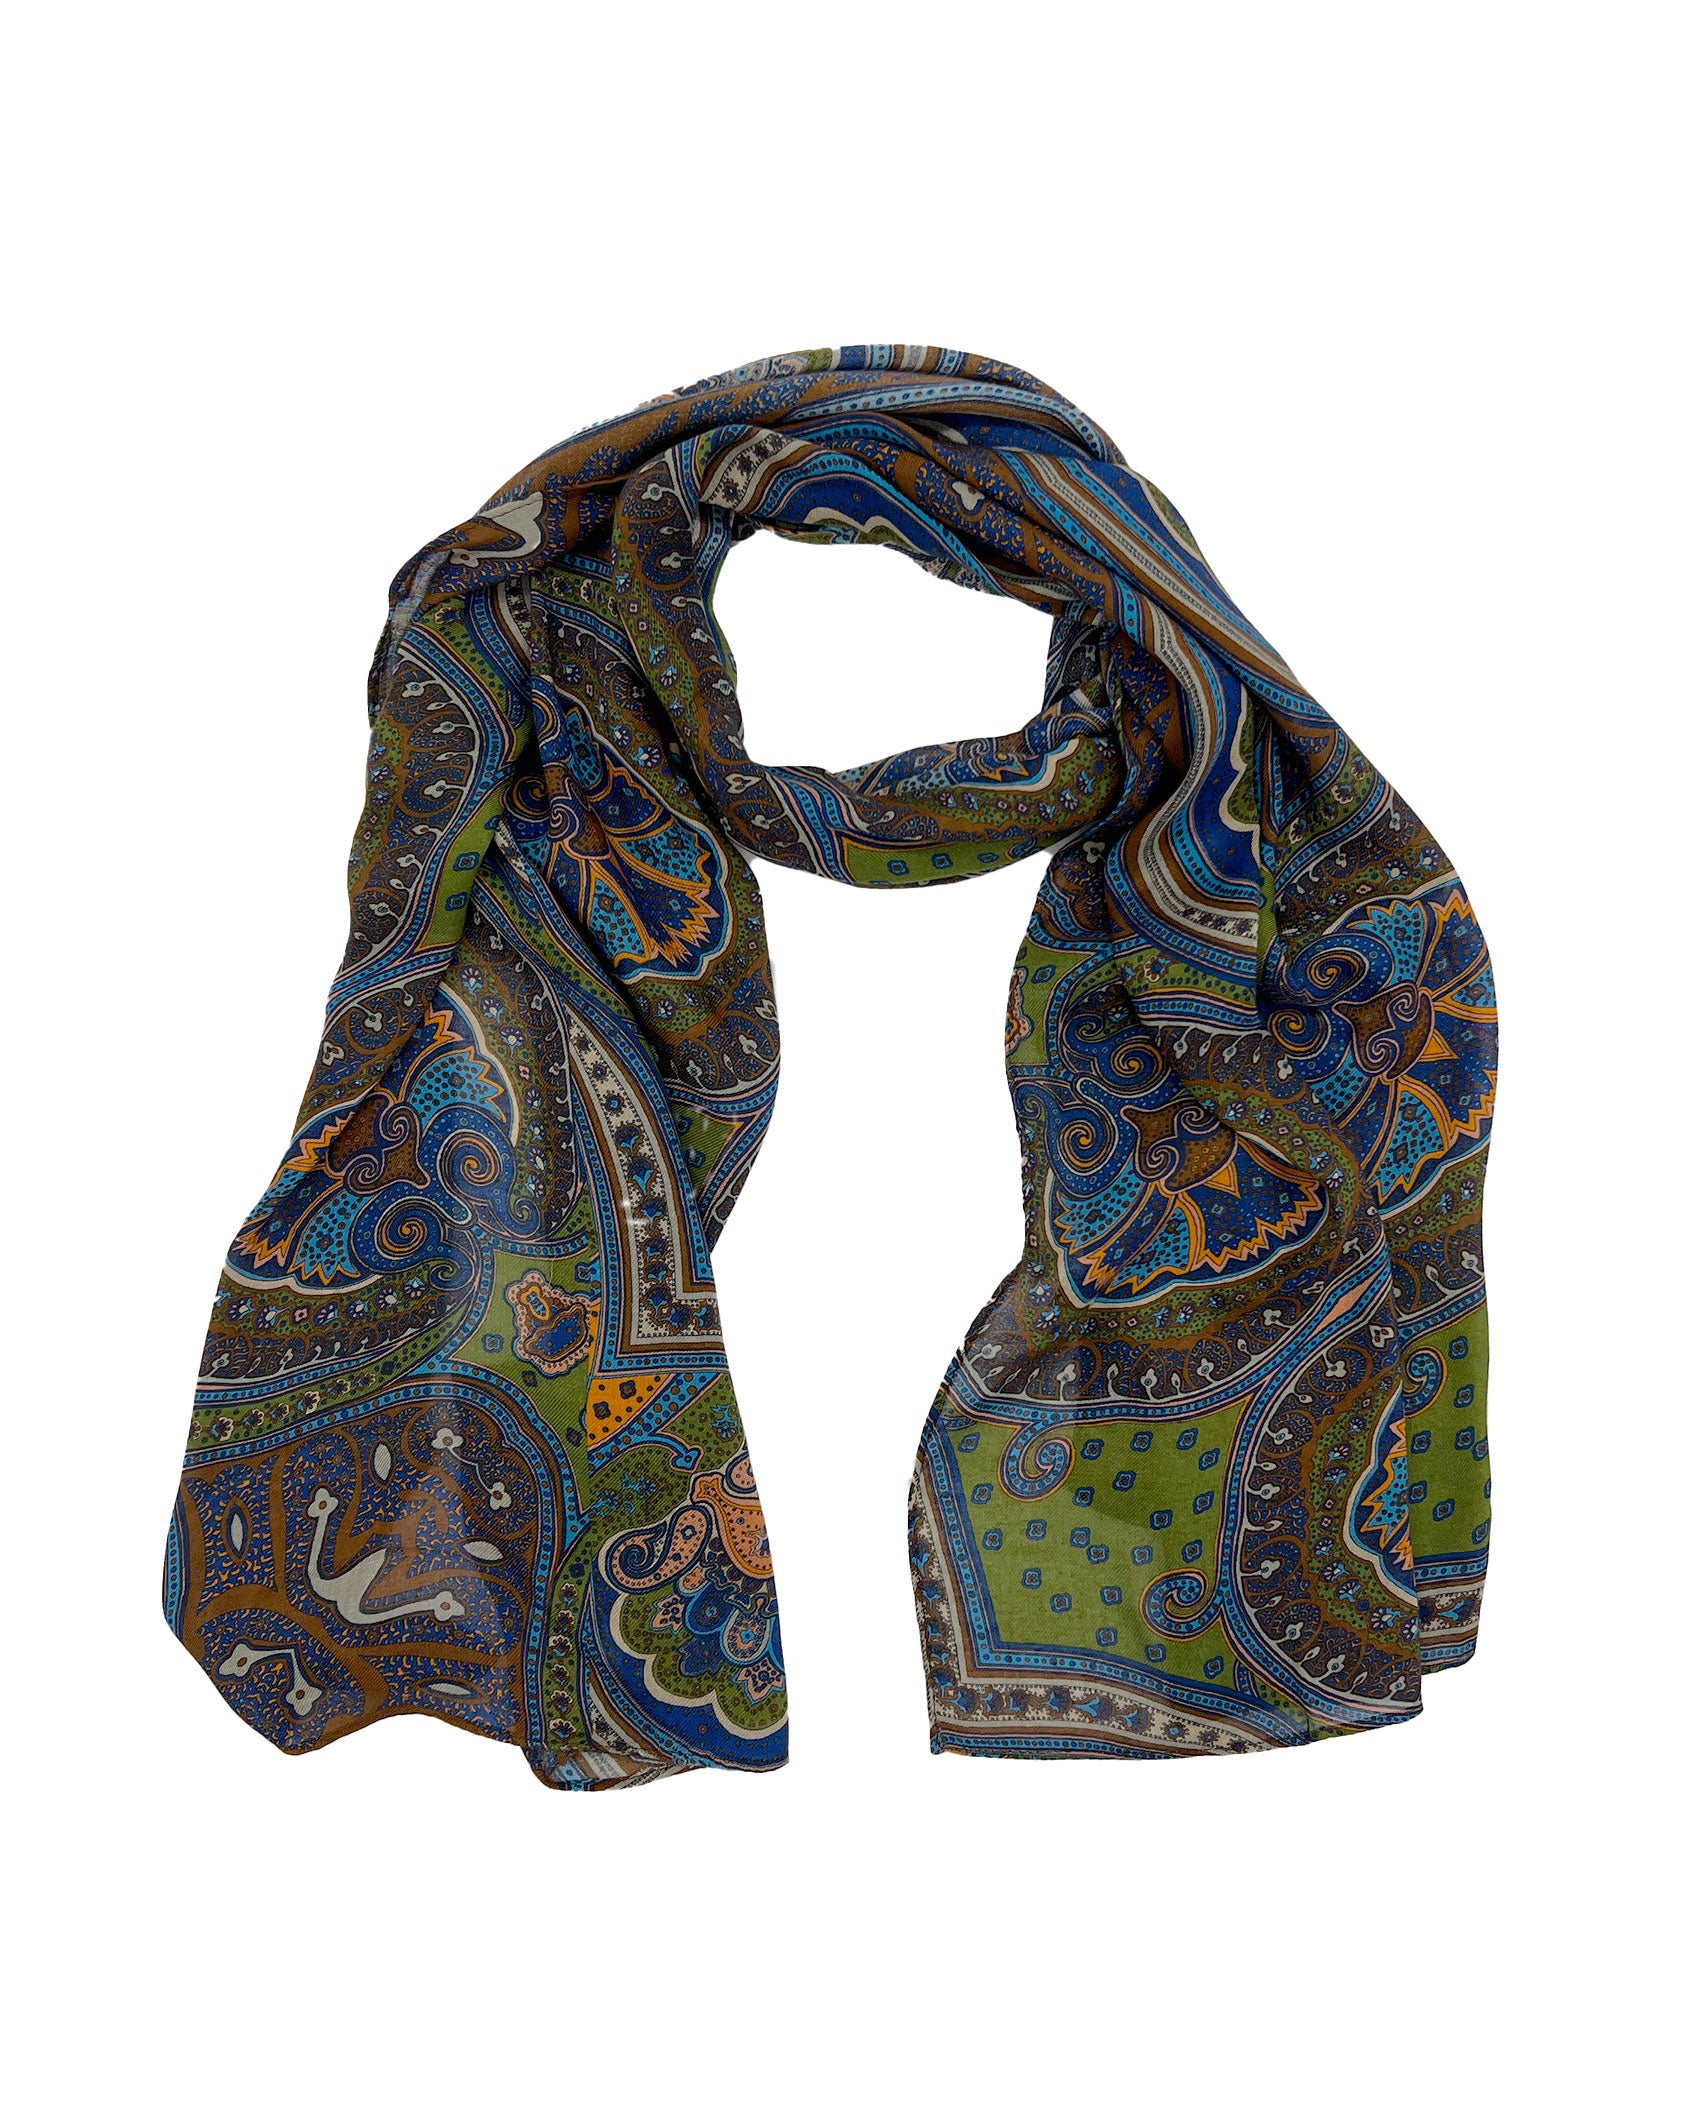 The Montreal multicoloured paisley-patterned bohemian wide scarf in appealing earthy tones. Knotted into a loop on a white background.